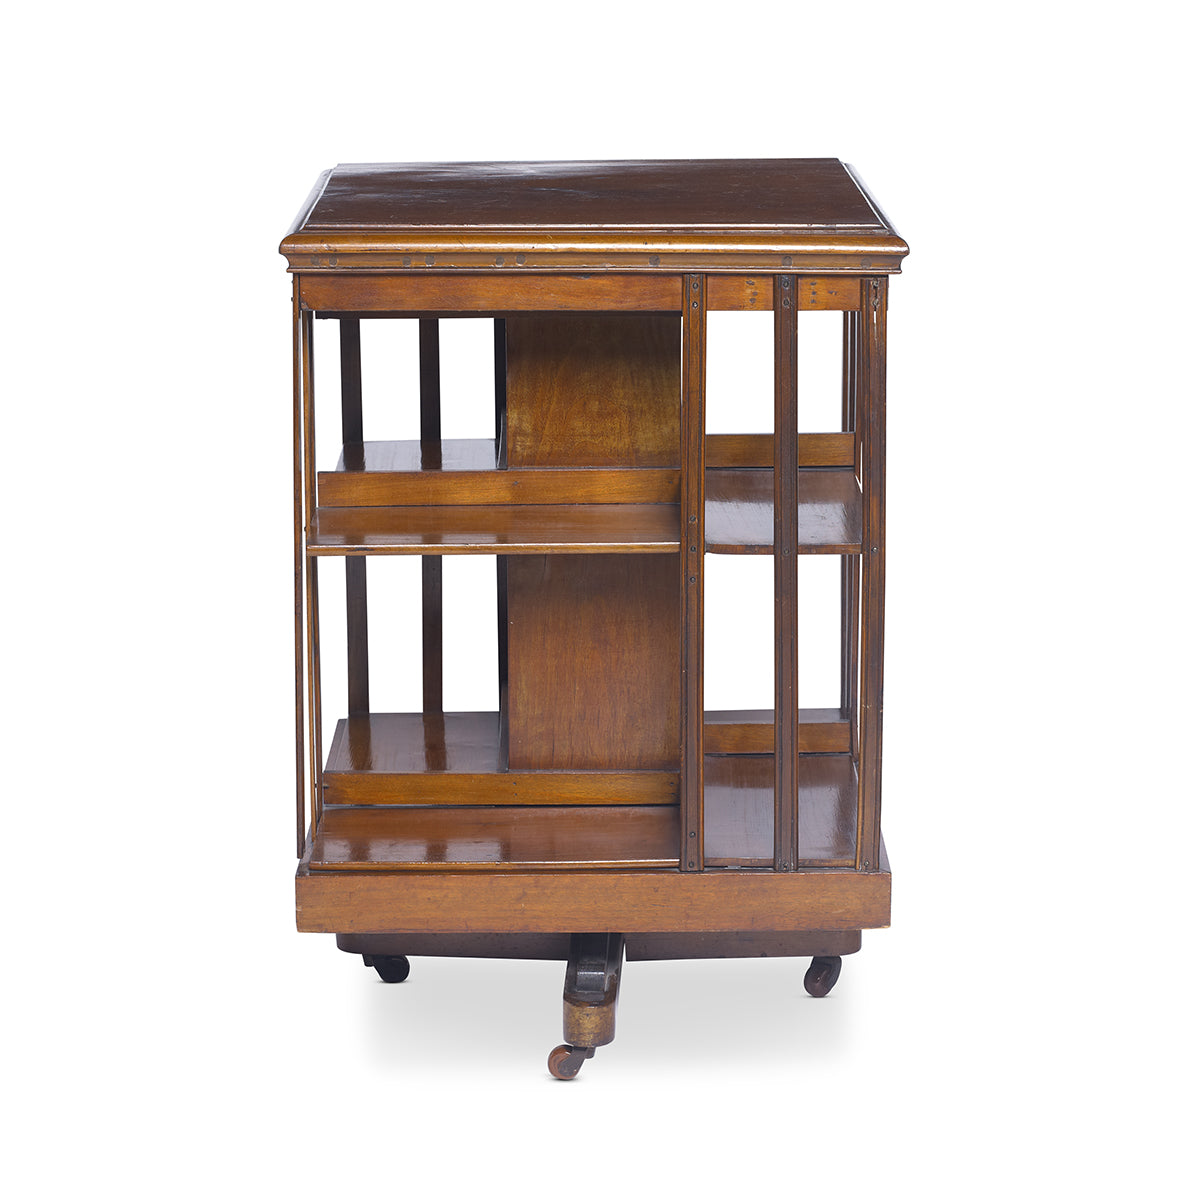 SOLD A very good quality Virginian-walnut two tier revolving bookcase, English Circa 1900